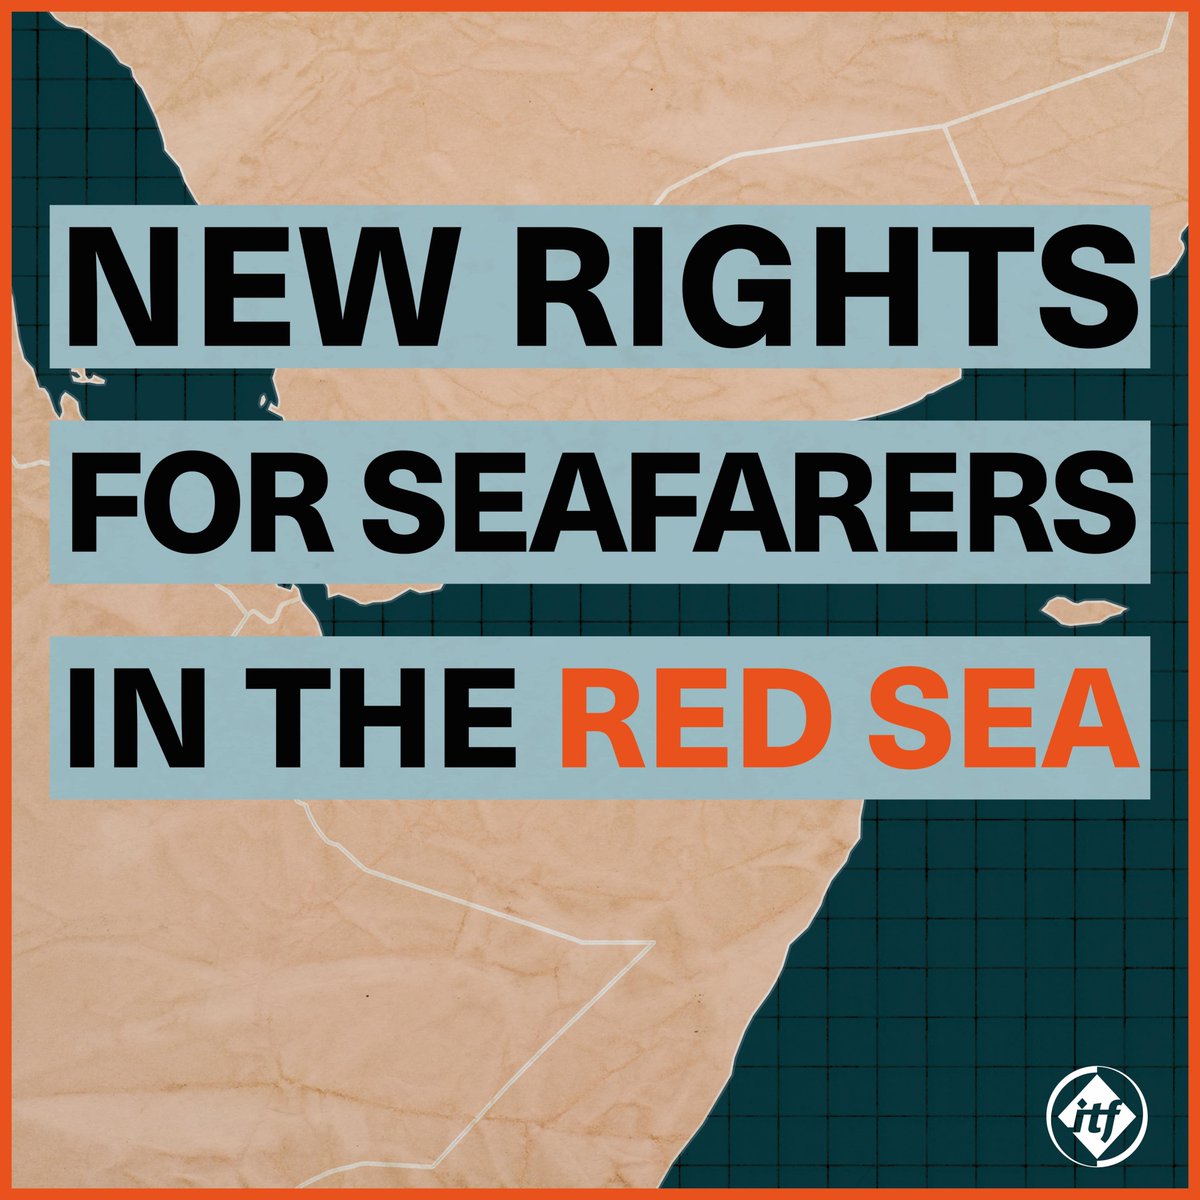 The situation in the Red Sea is becoming more dangerous for seafarers. As a result, new support measures have been negotiated which apply to all seafarers aboard ships covered by International Bargaining Forum (IBF) agreements🧵(1/5)